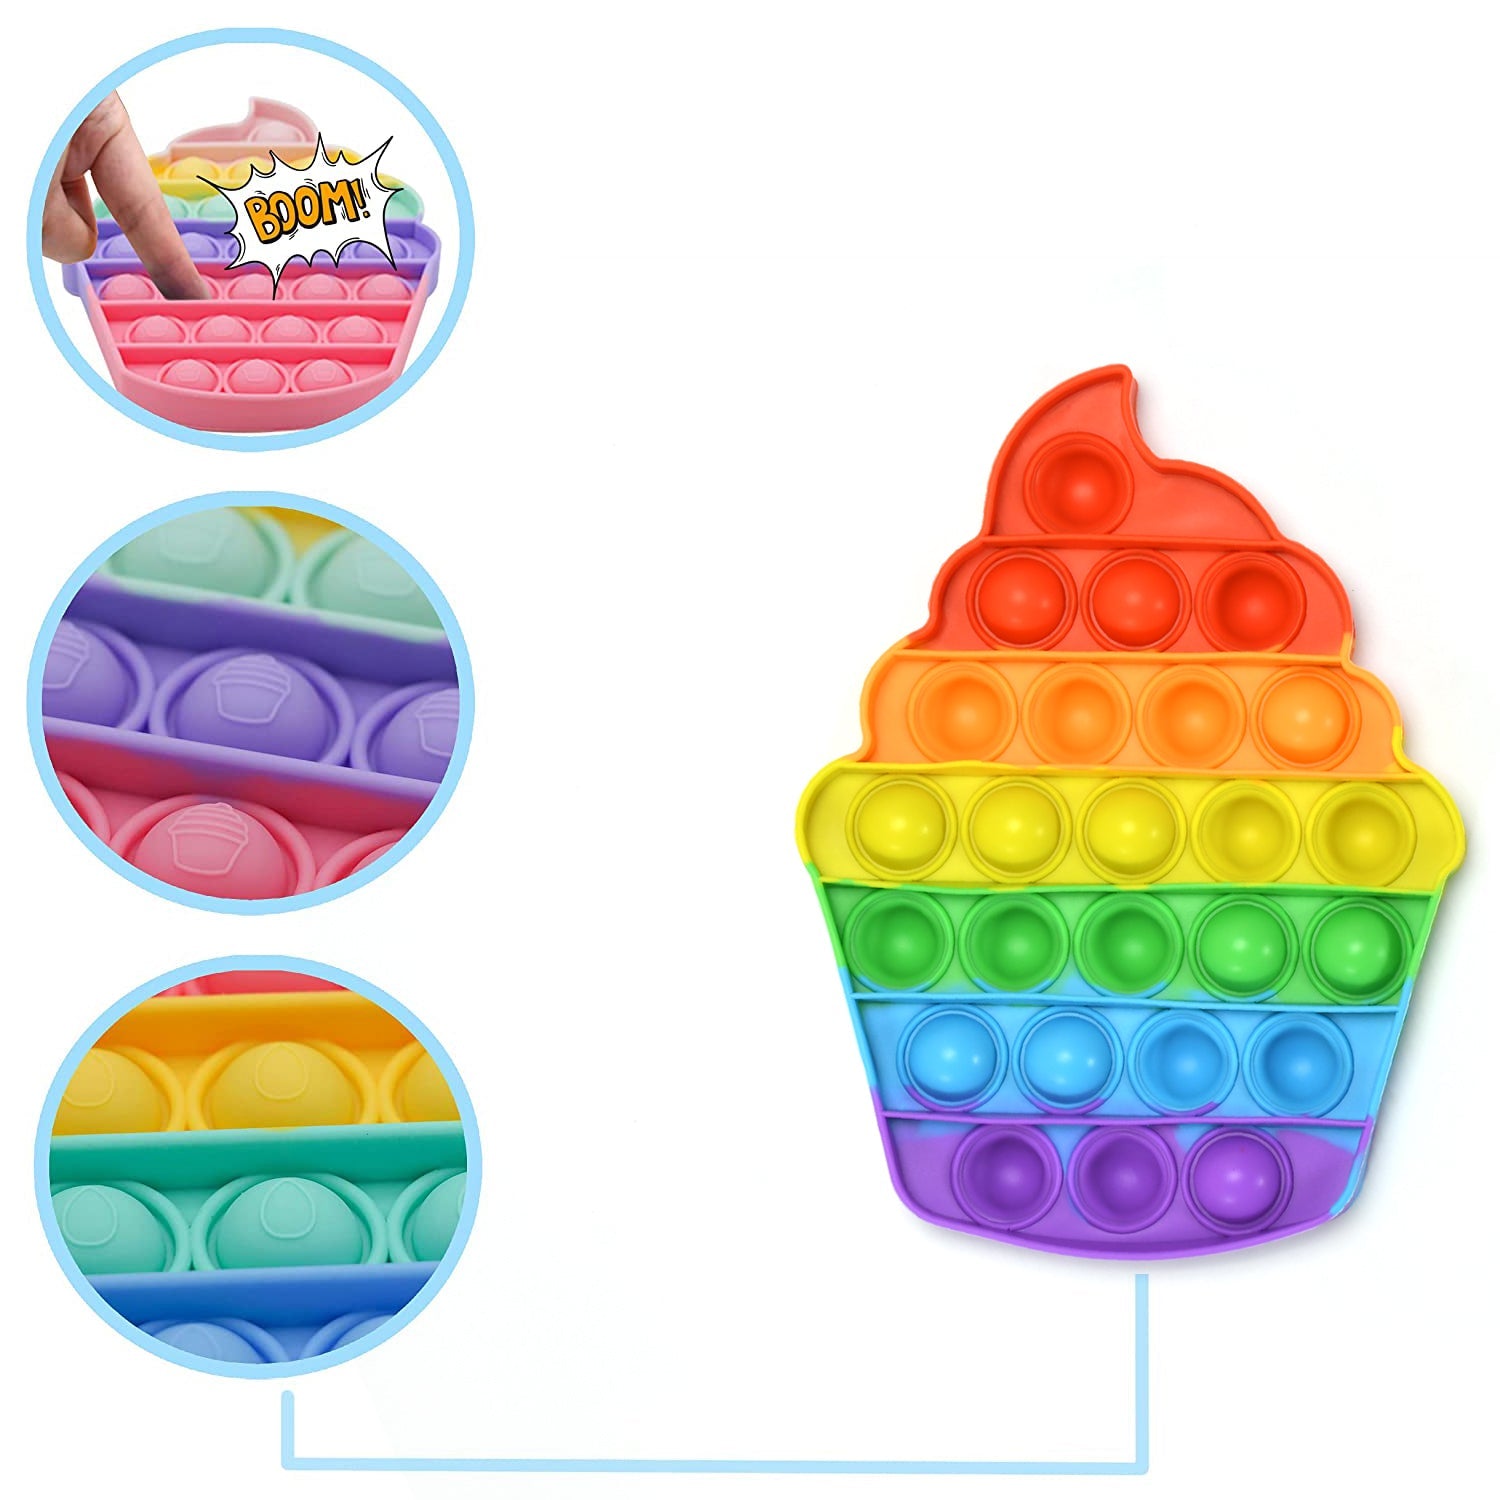 4476 Ice Cream Softy- Fidget Popping Sounds Toy, BPA Free Silicone, Push Bubbles Toy for Autism Stress Reliever, Sensory Toy Pop It Toy DeoDap